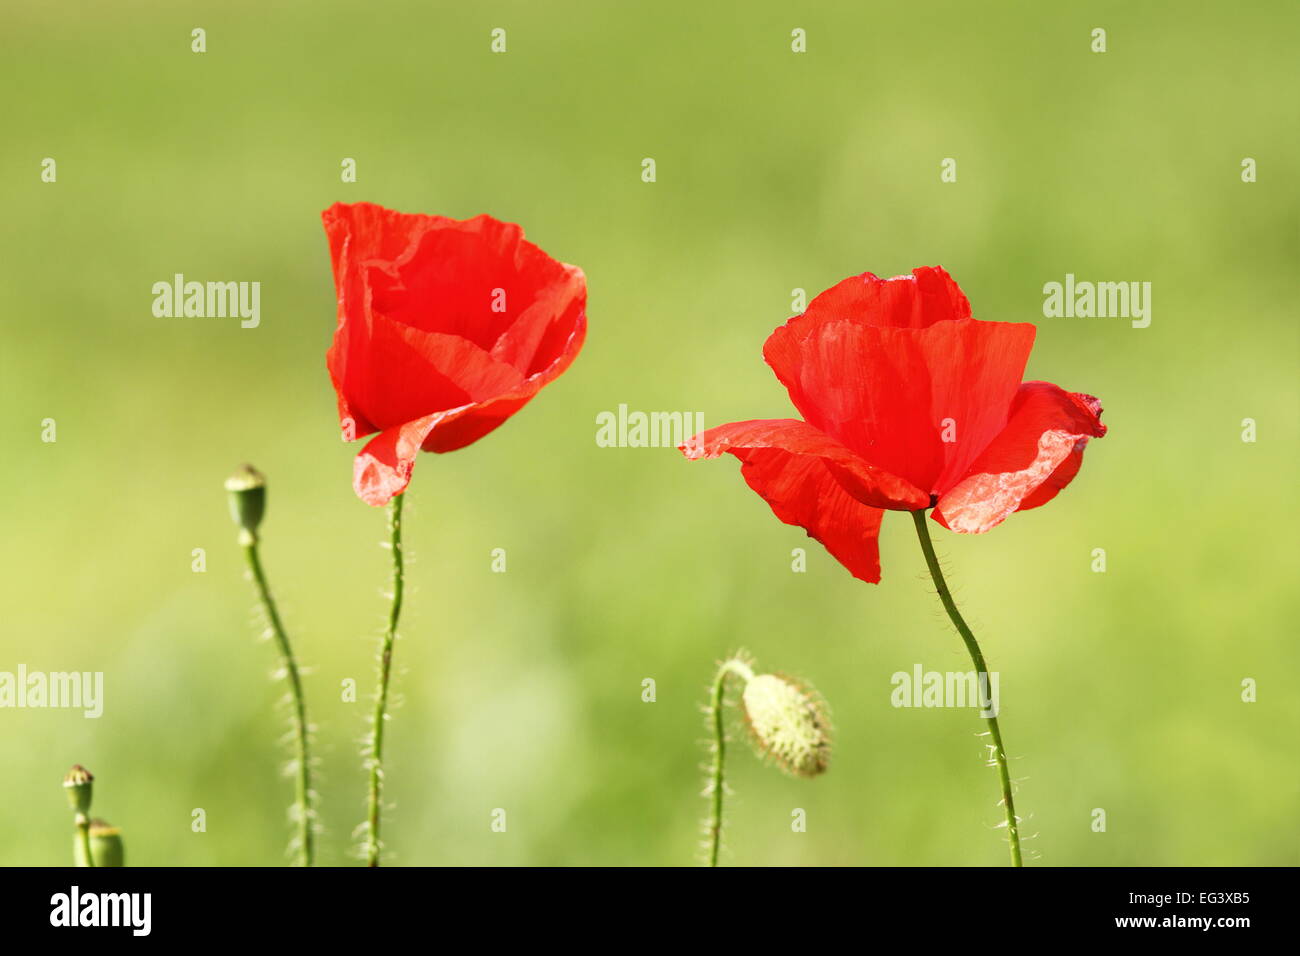 two wild poppy flowers ( Papaver rhoeas ) over green out of focus background Stock Photo